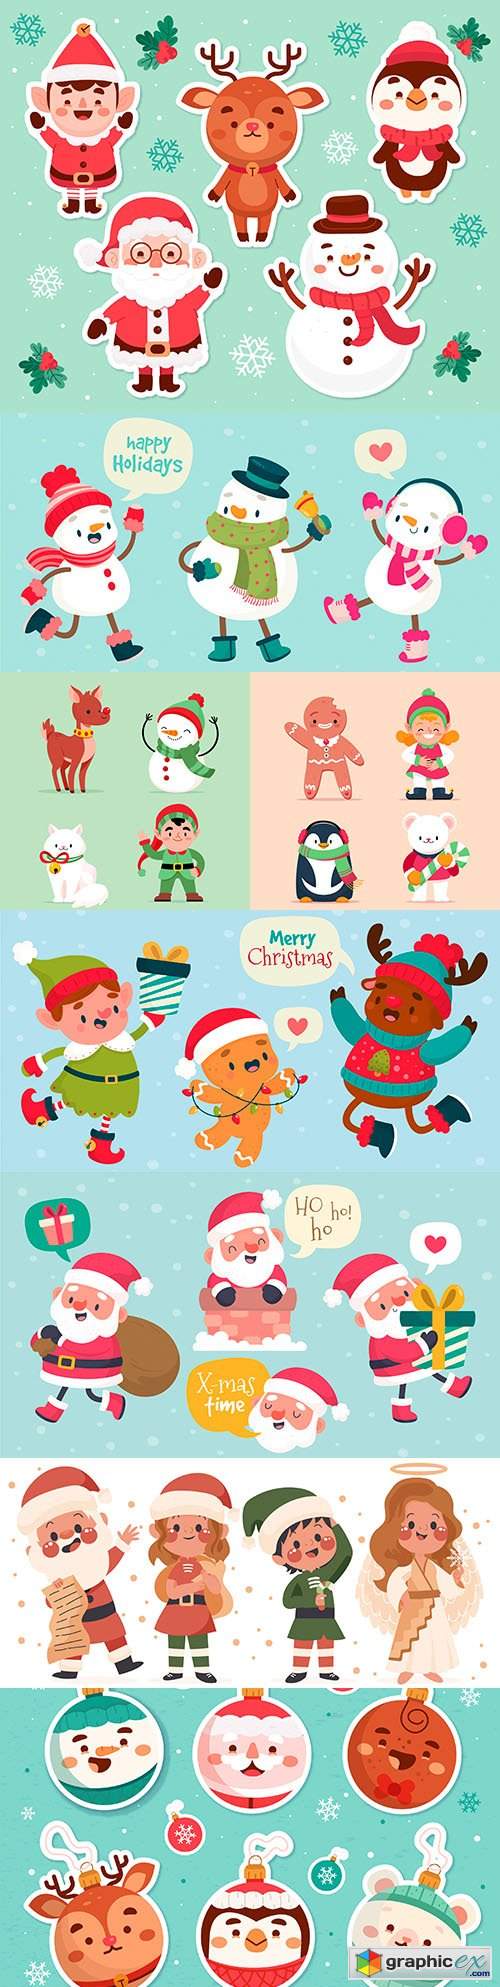  Collection of painted Christmas characters and cartoon design icons 